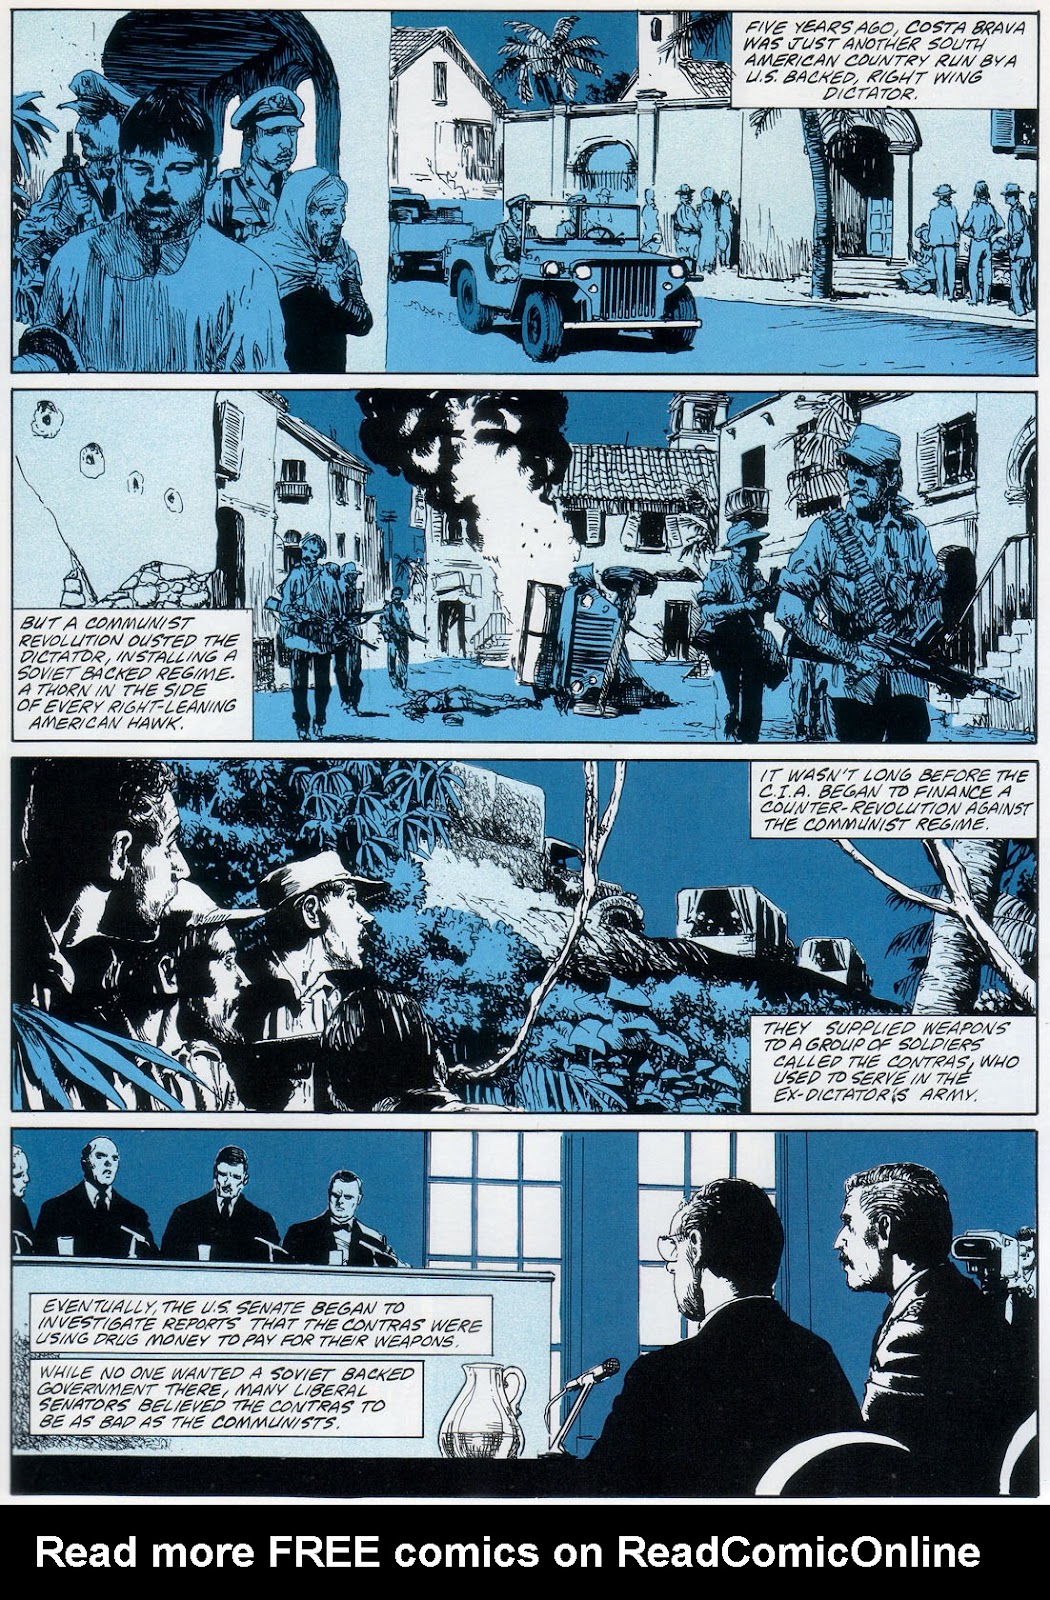 Marvel Graphic Novel issue 57 - Rick Mason - The Agent - Page 21